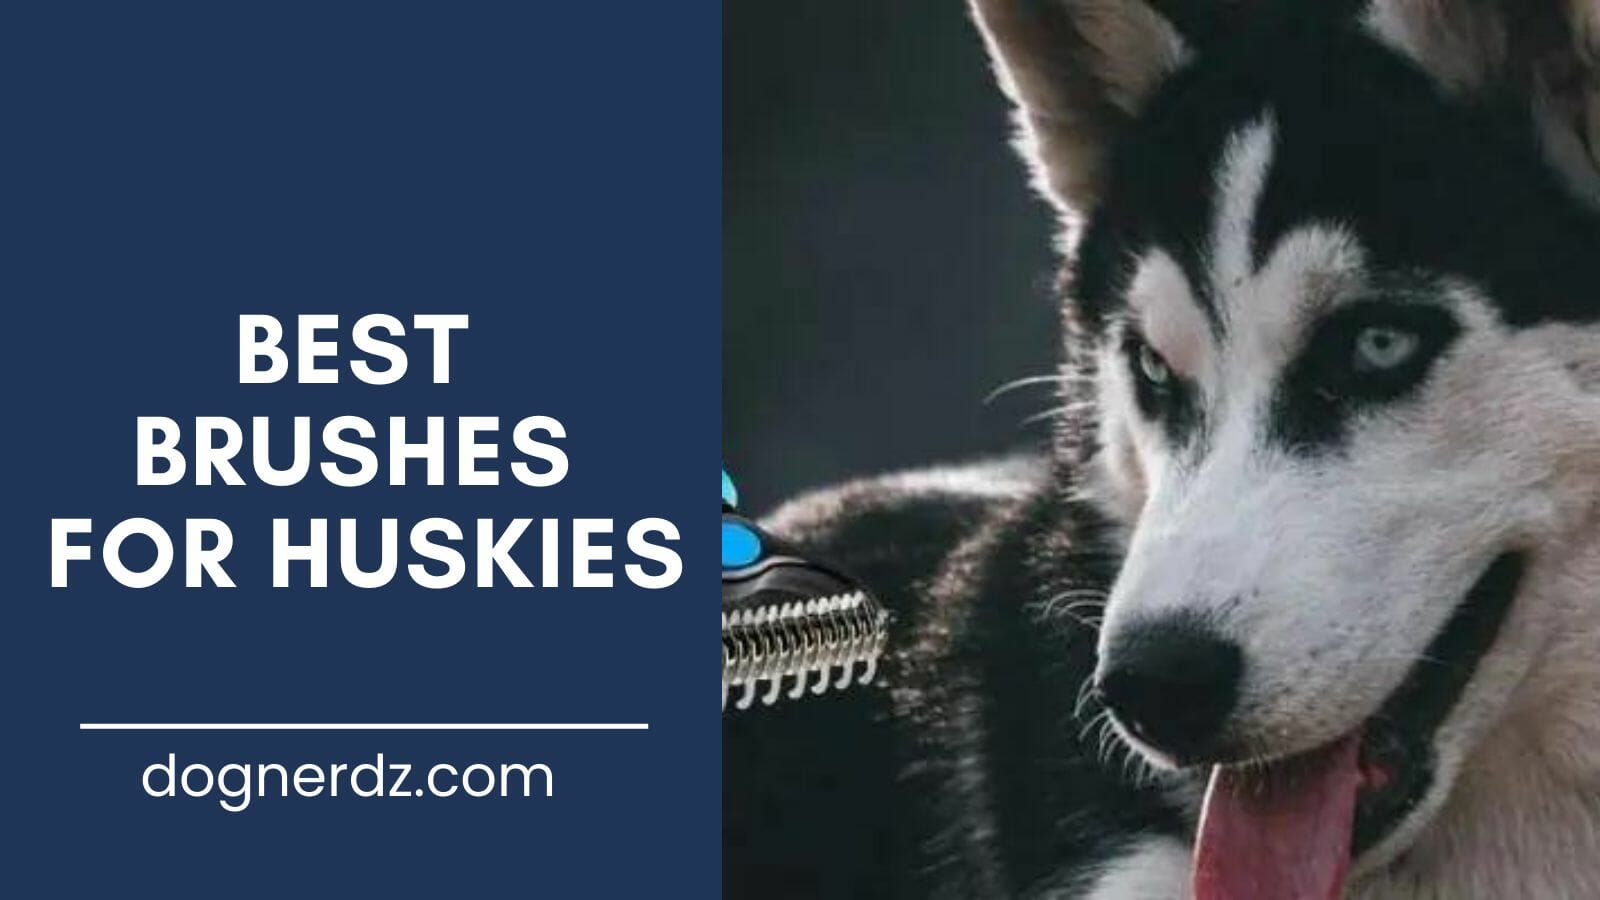 review of the best brushes for huskies